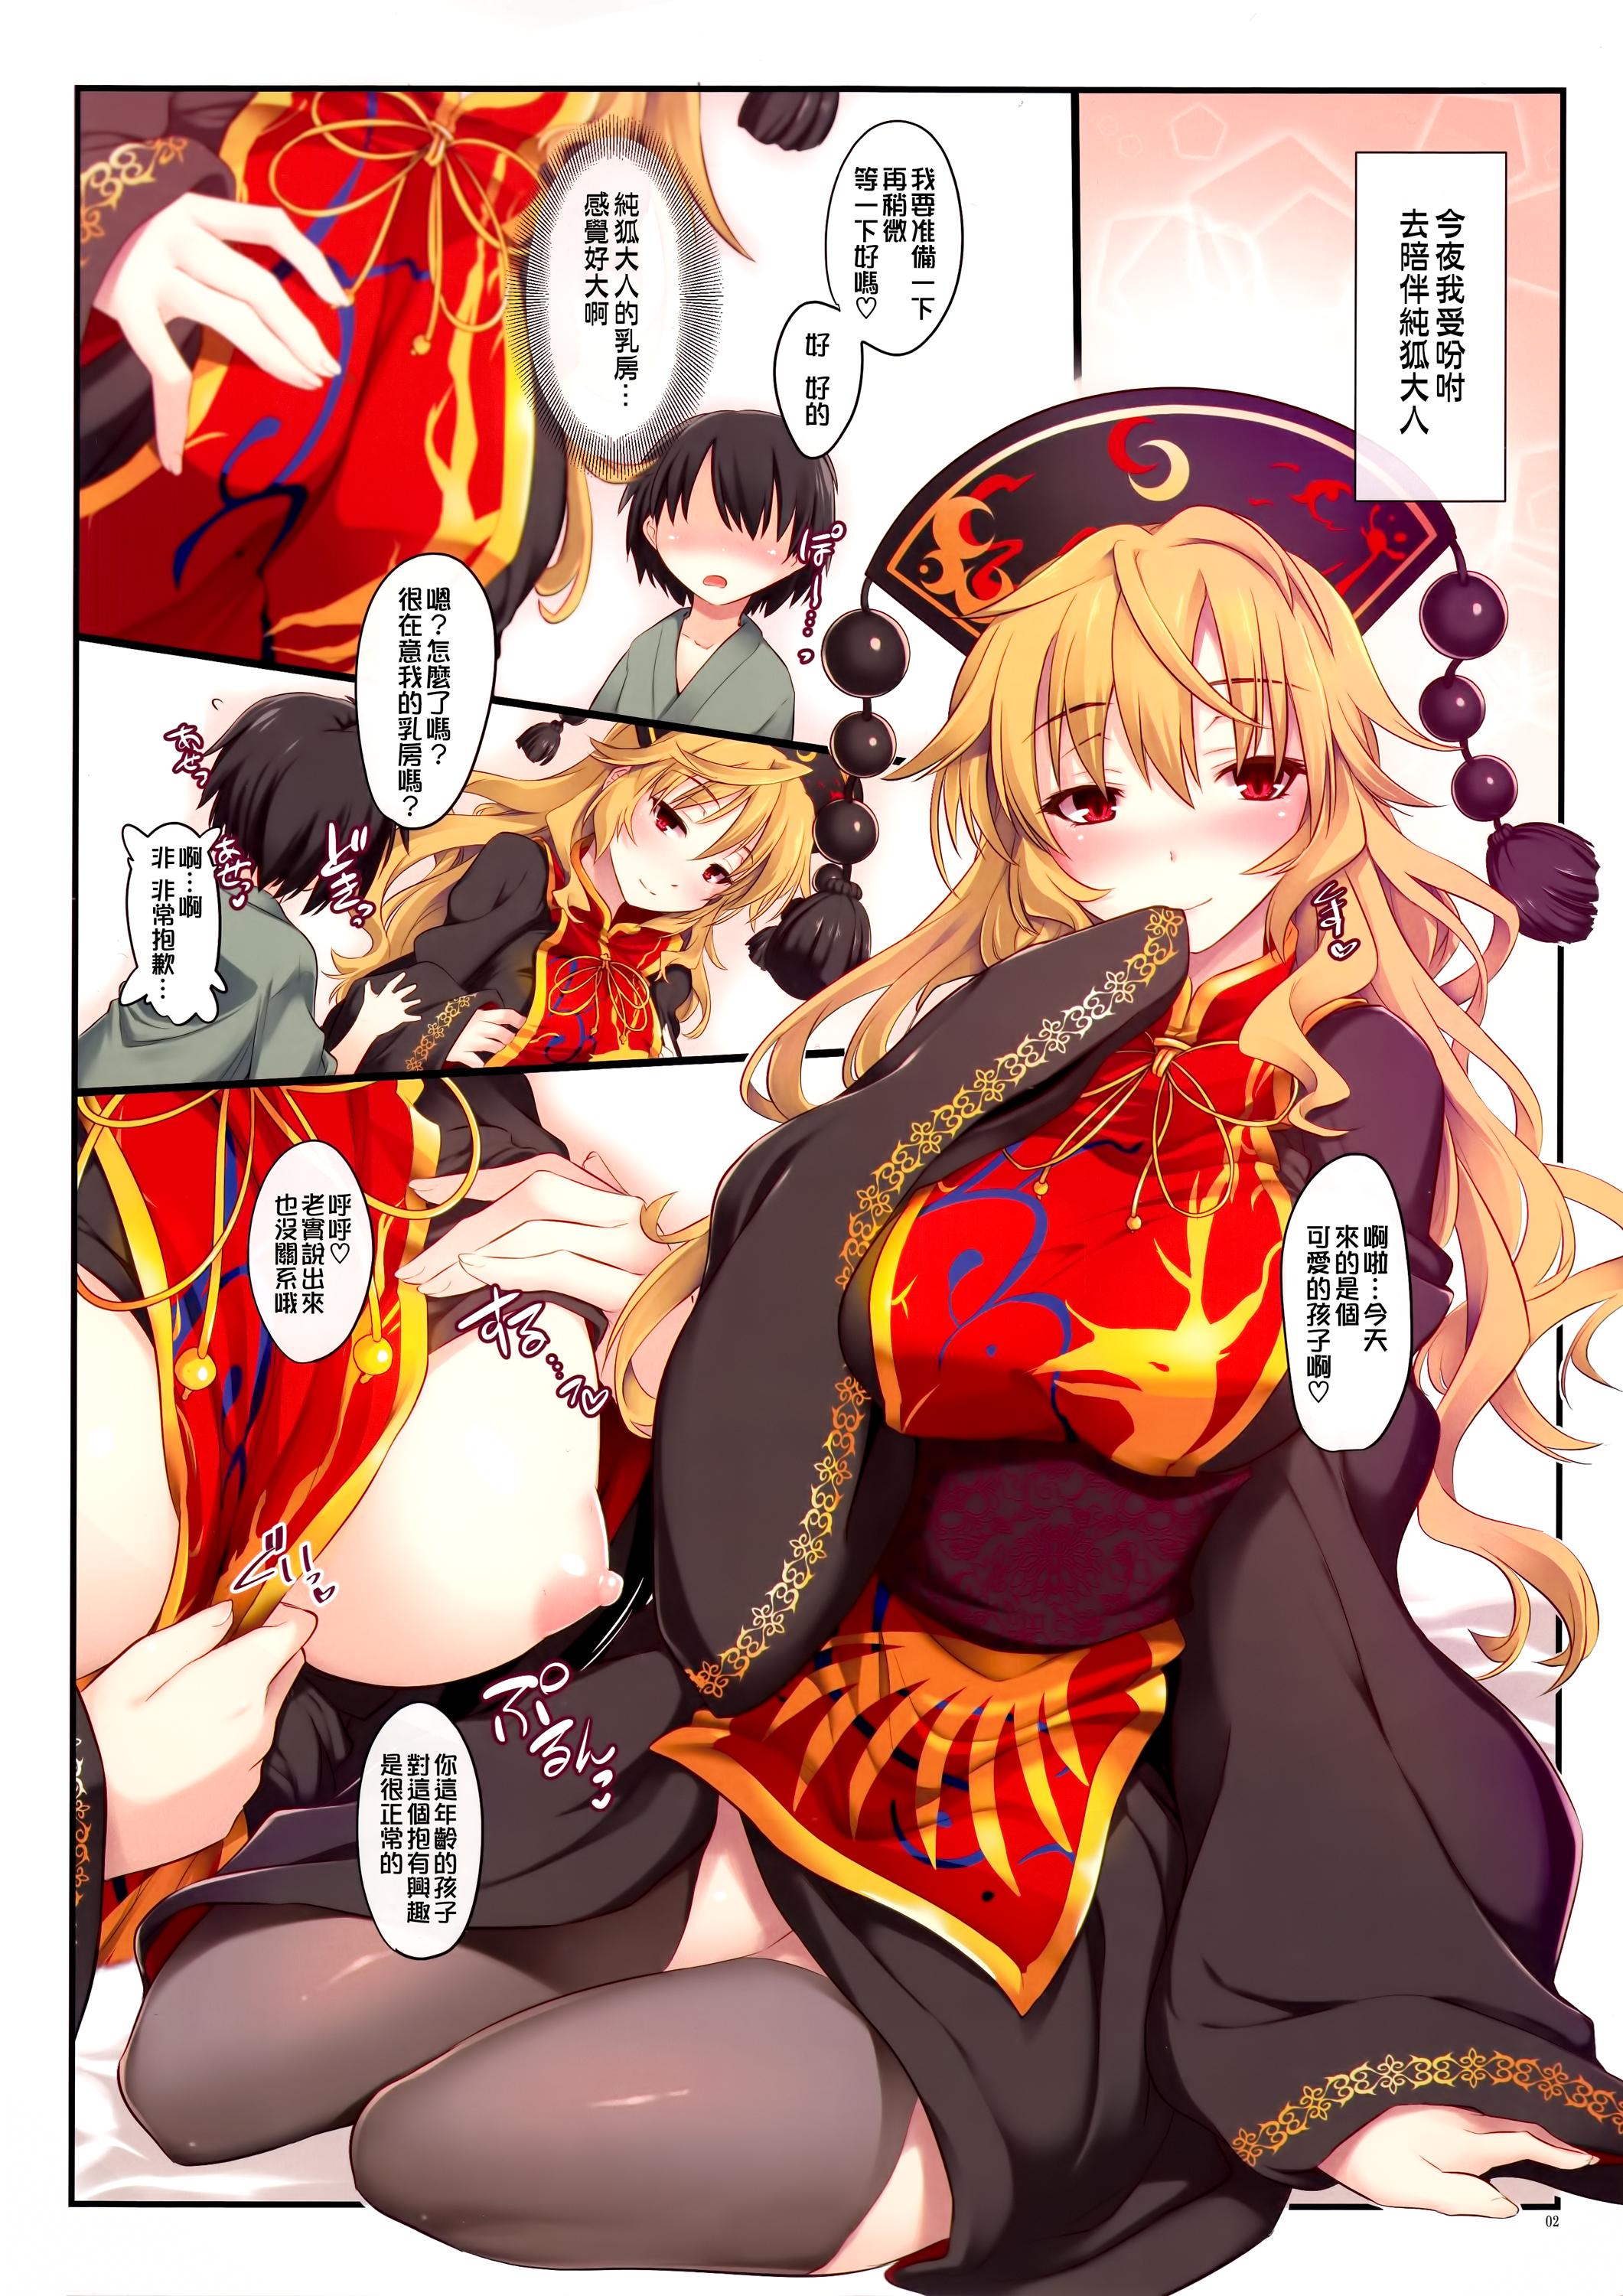 Woman Fucking Junsui Seisai - Touhou project Orgasm - Page 3